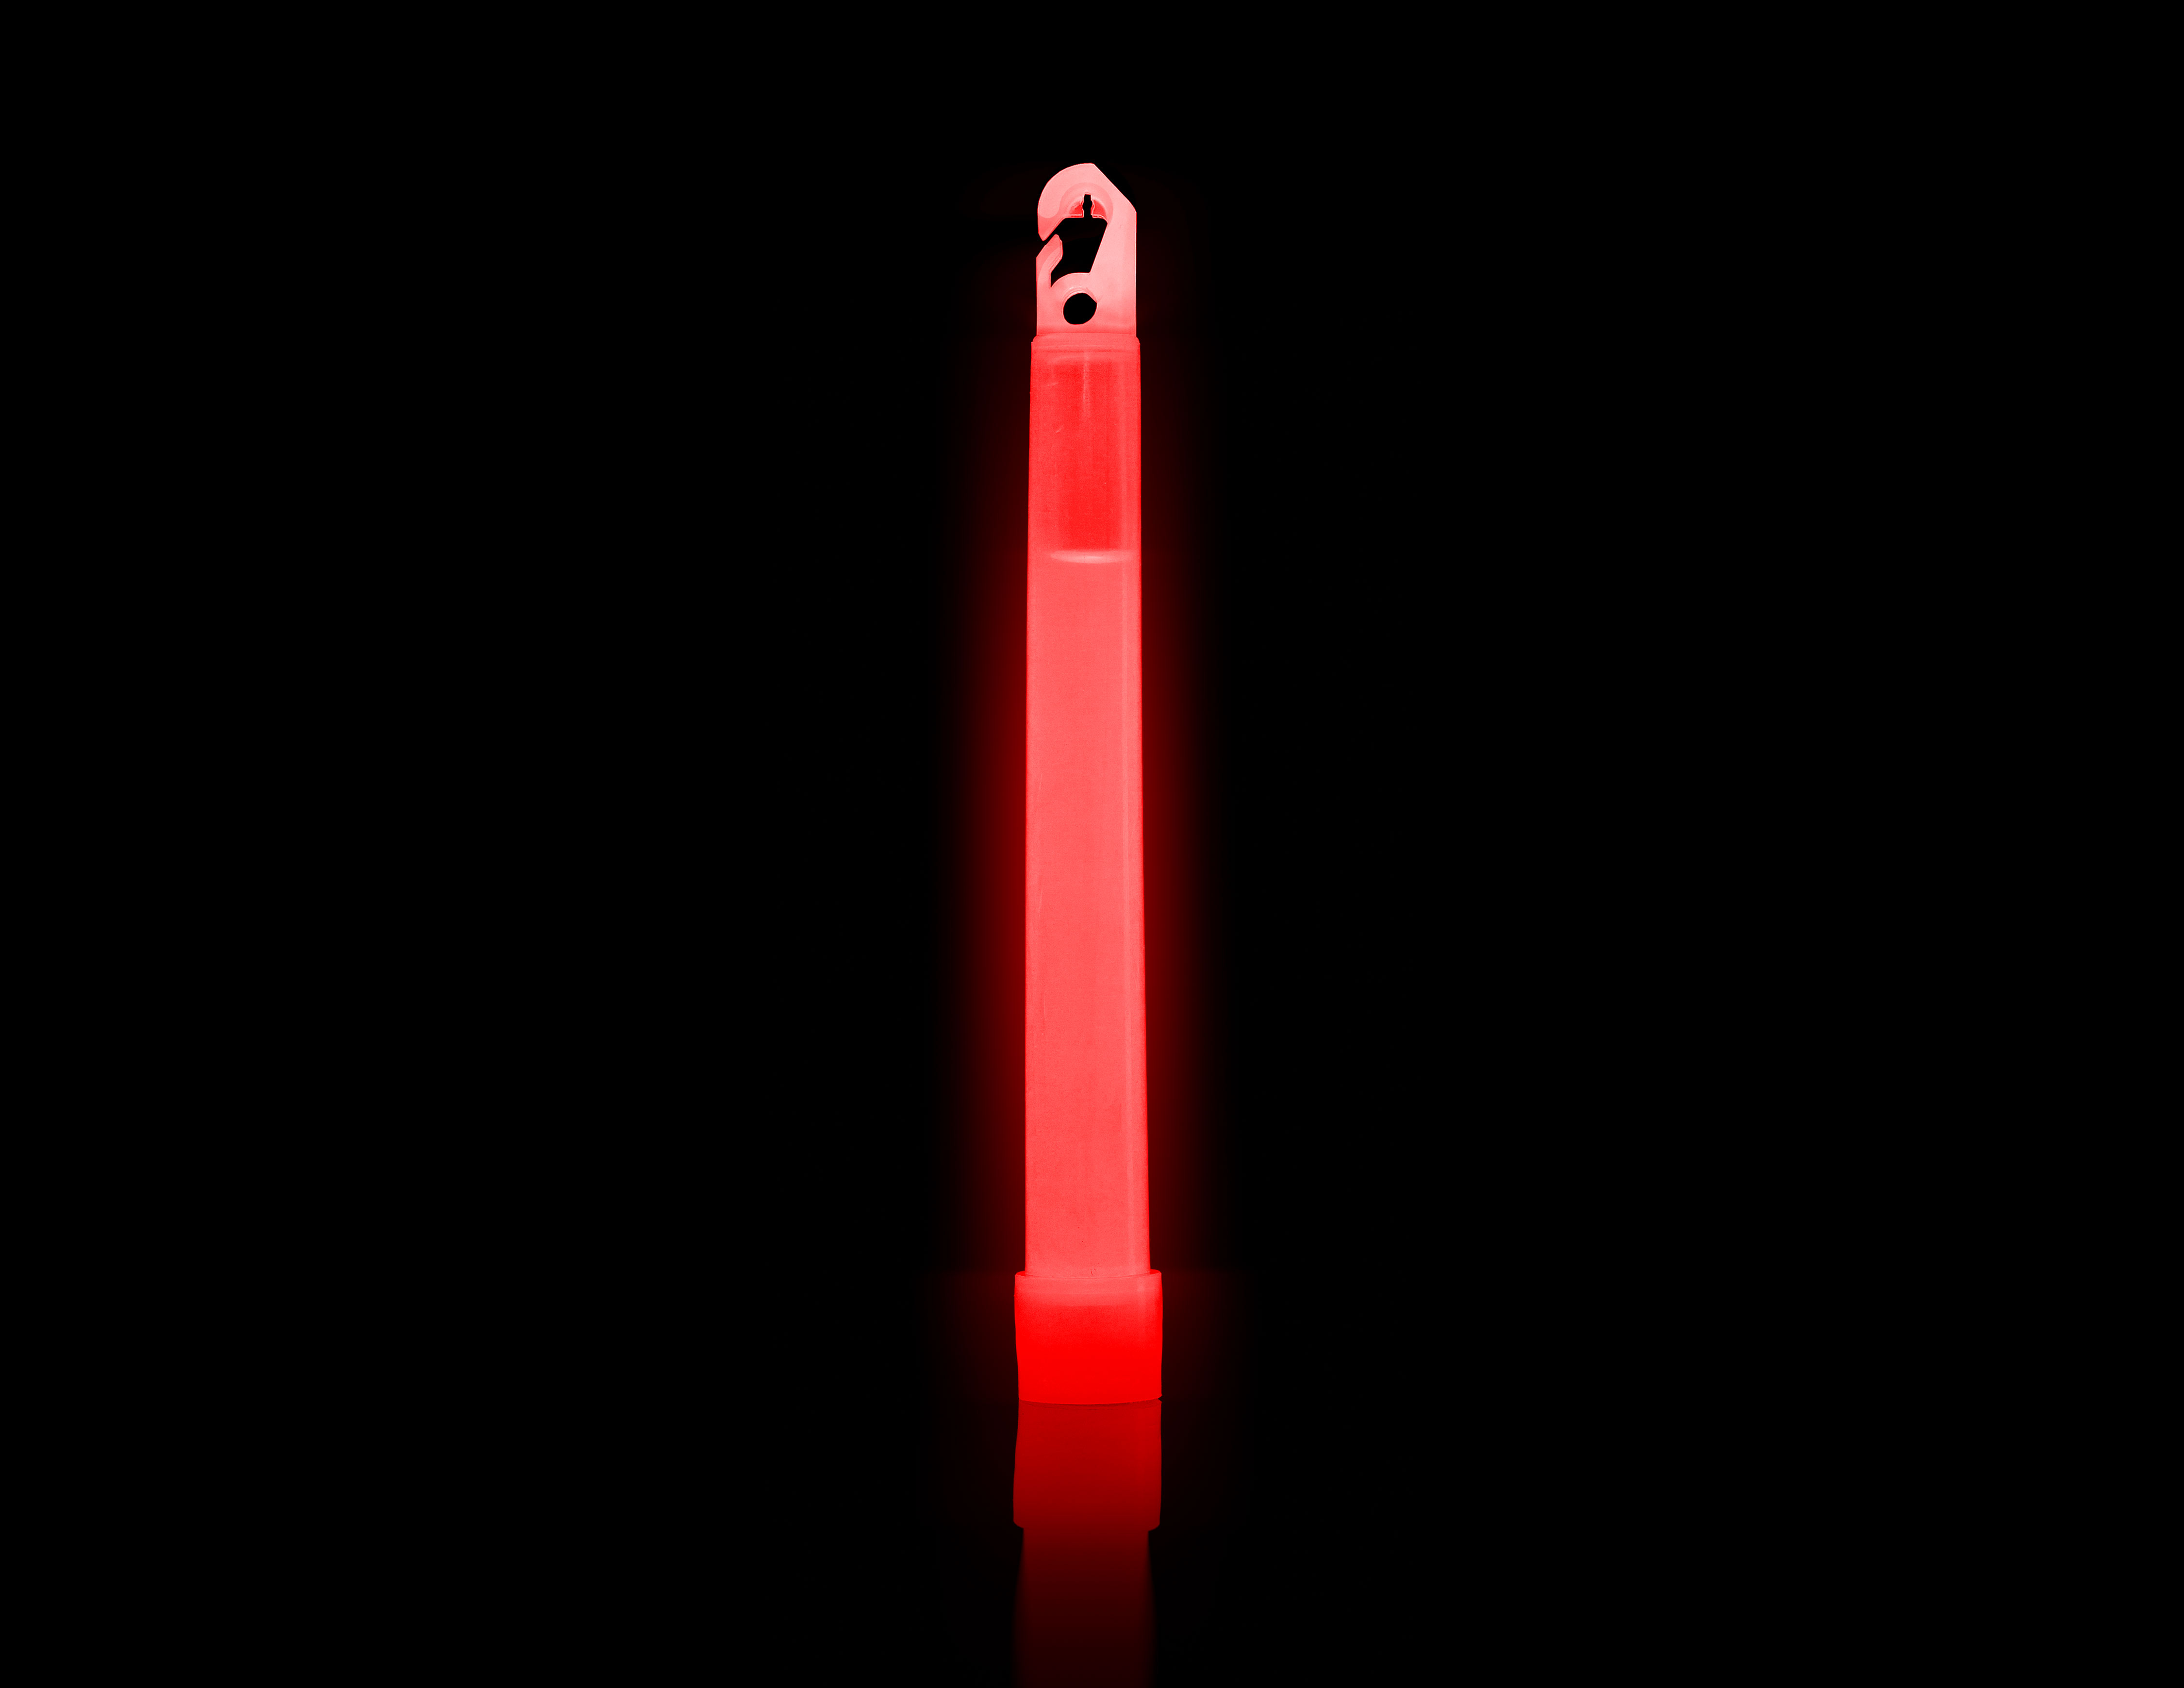 6″ Red Cyalume Glow Sticks Army Ideal Camping Hiking Preppers 